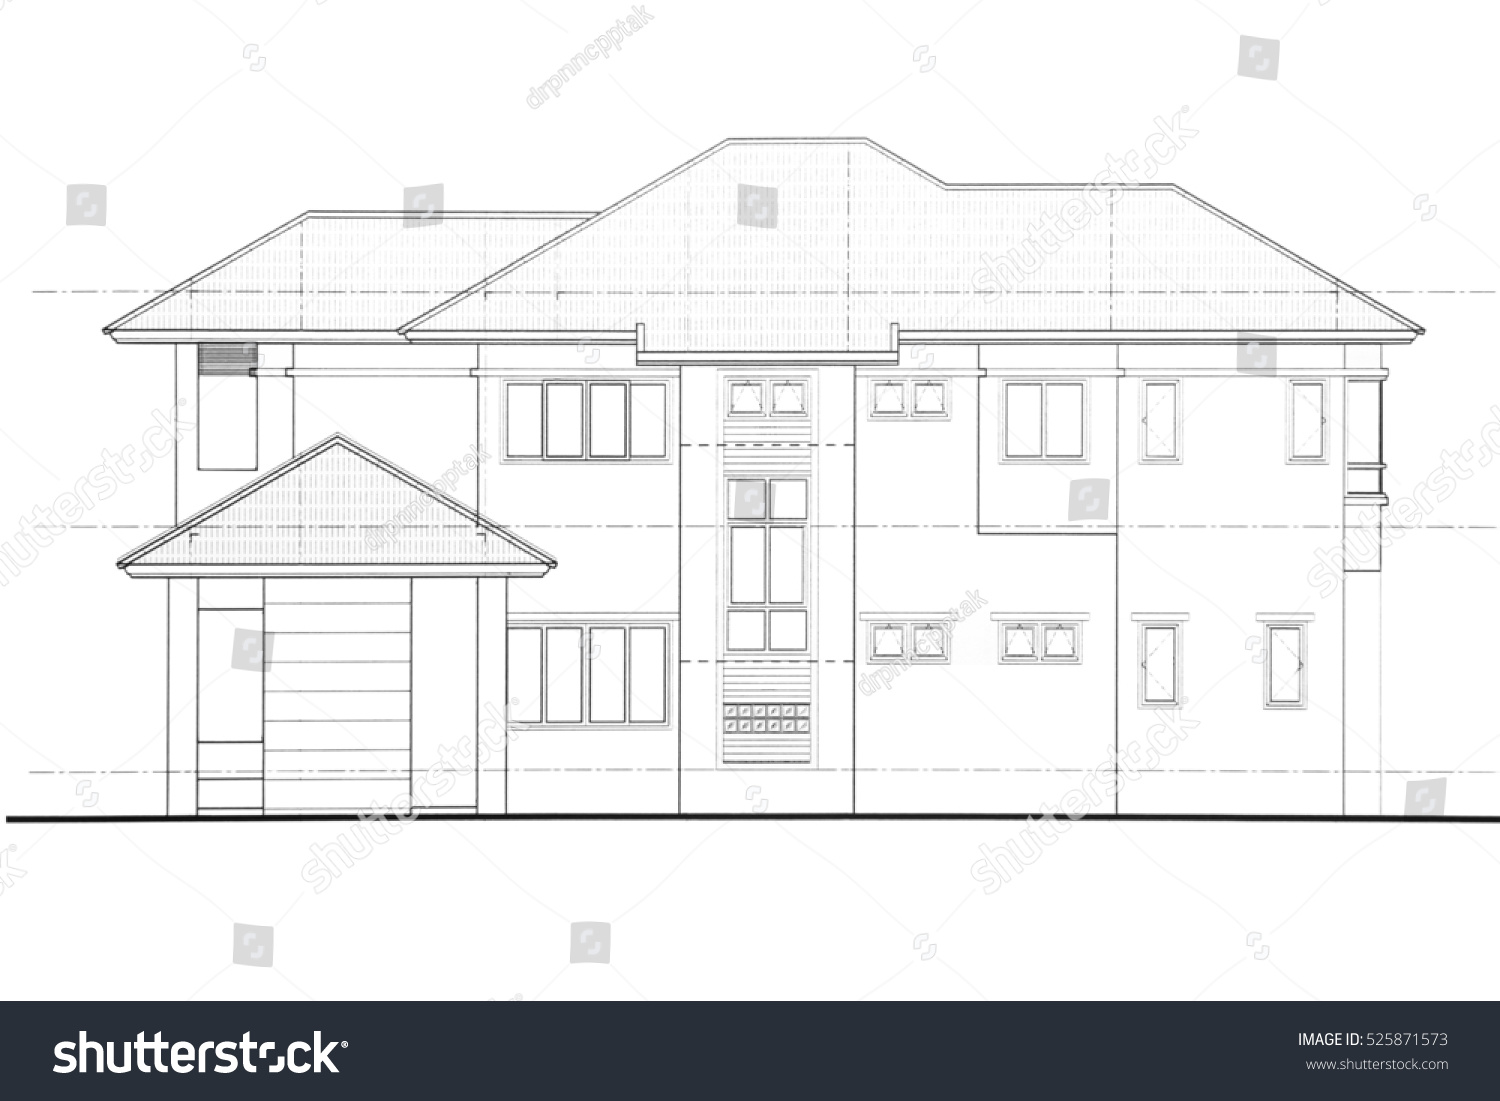  House Plan Side View  Stock Illustration 525871573 